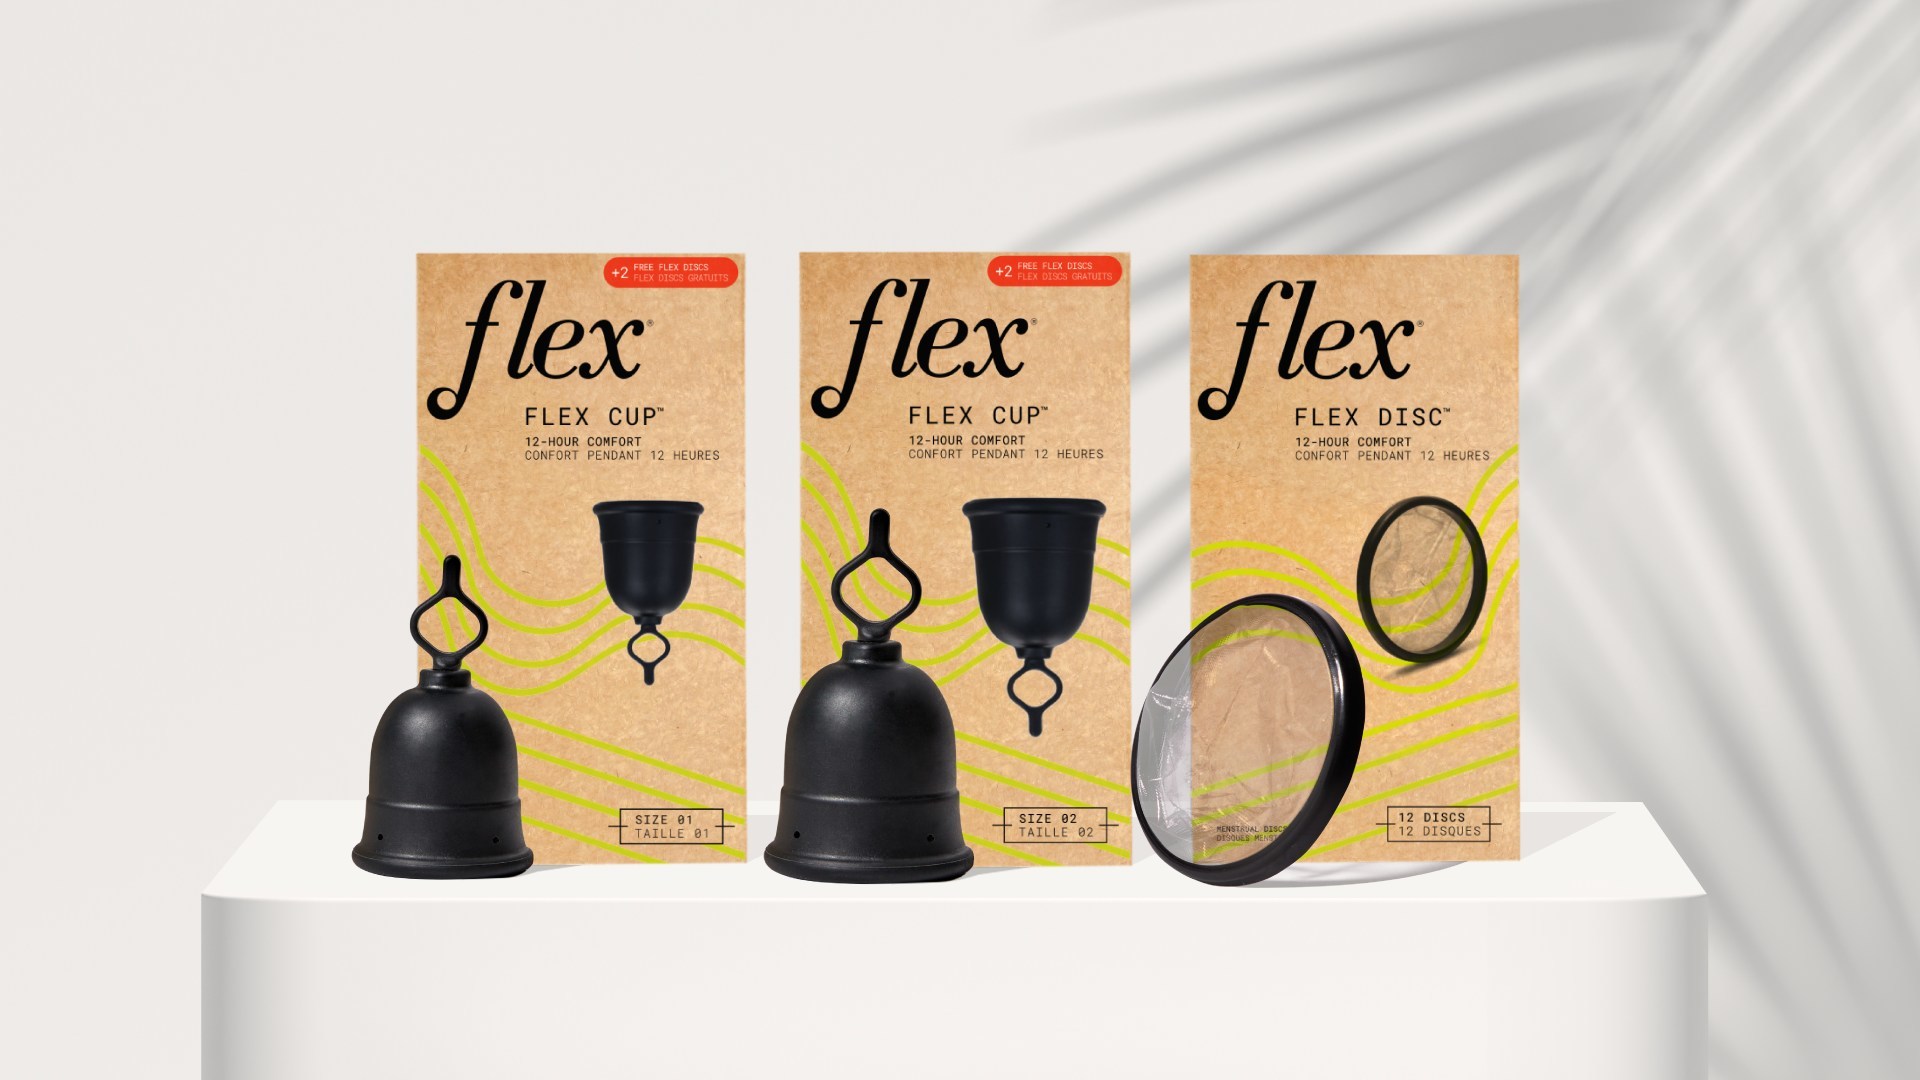 Flex period products get green light from Health Canada - Canadian